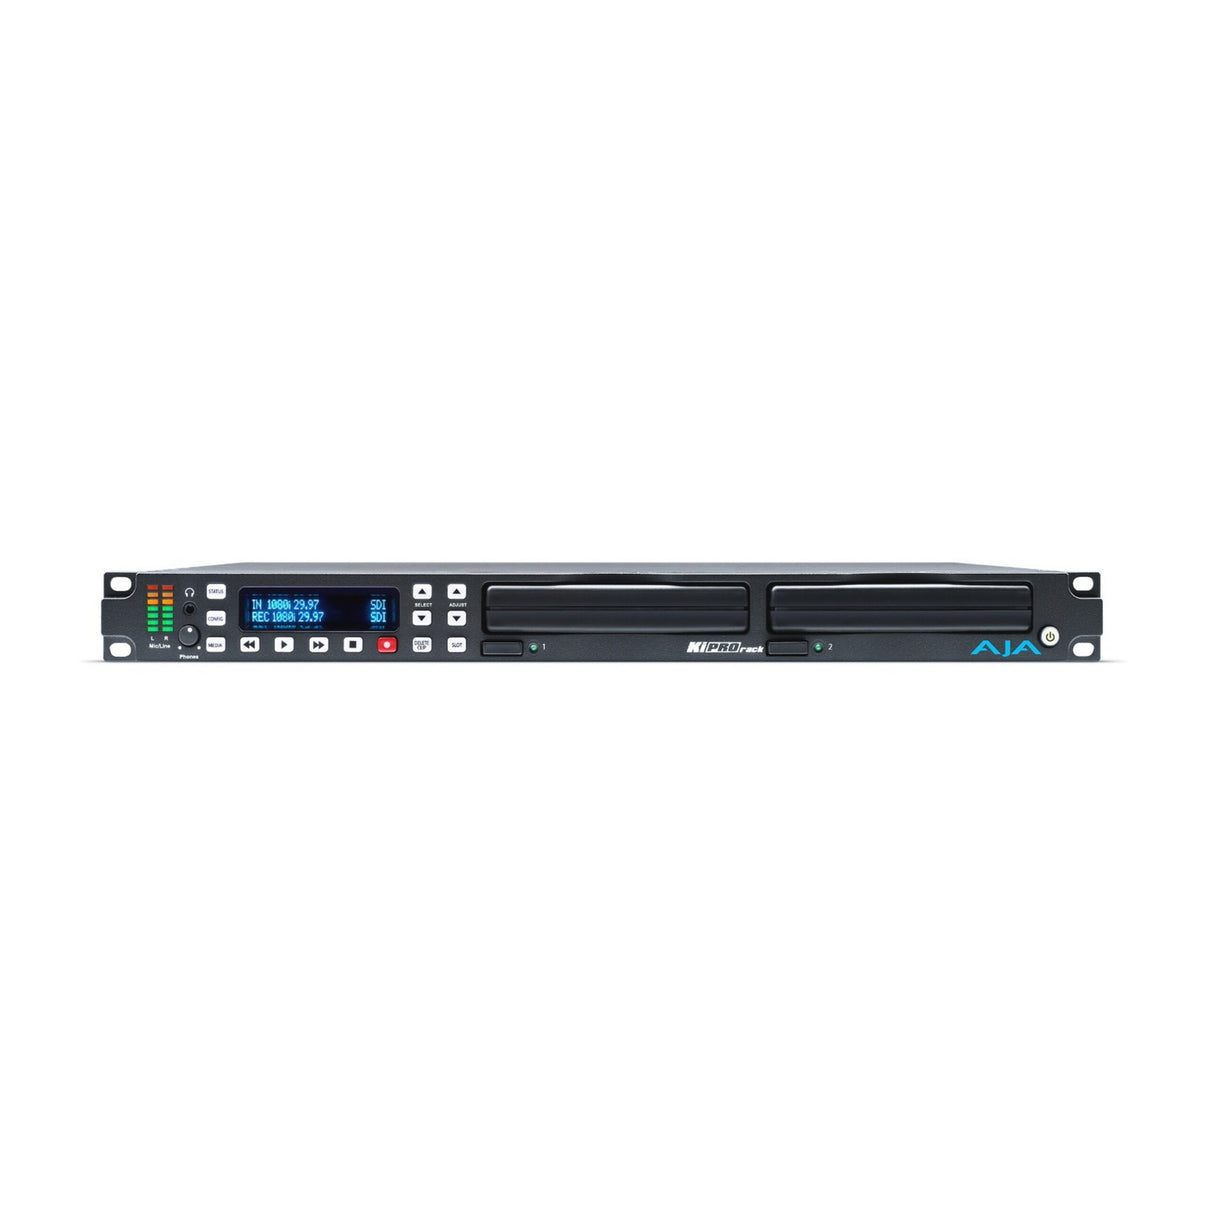 AJA Ki Pro Rack HD Recorder/Player with ProRes and Avid DnX Support